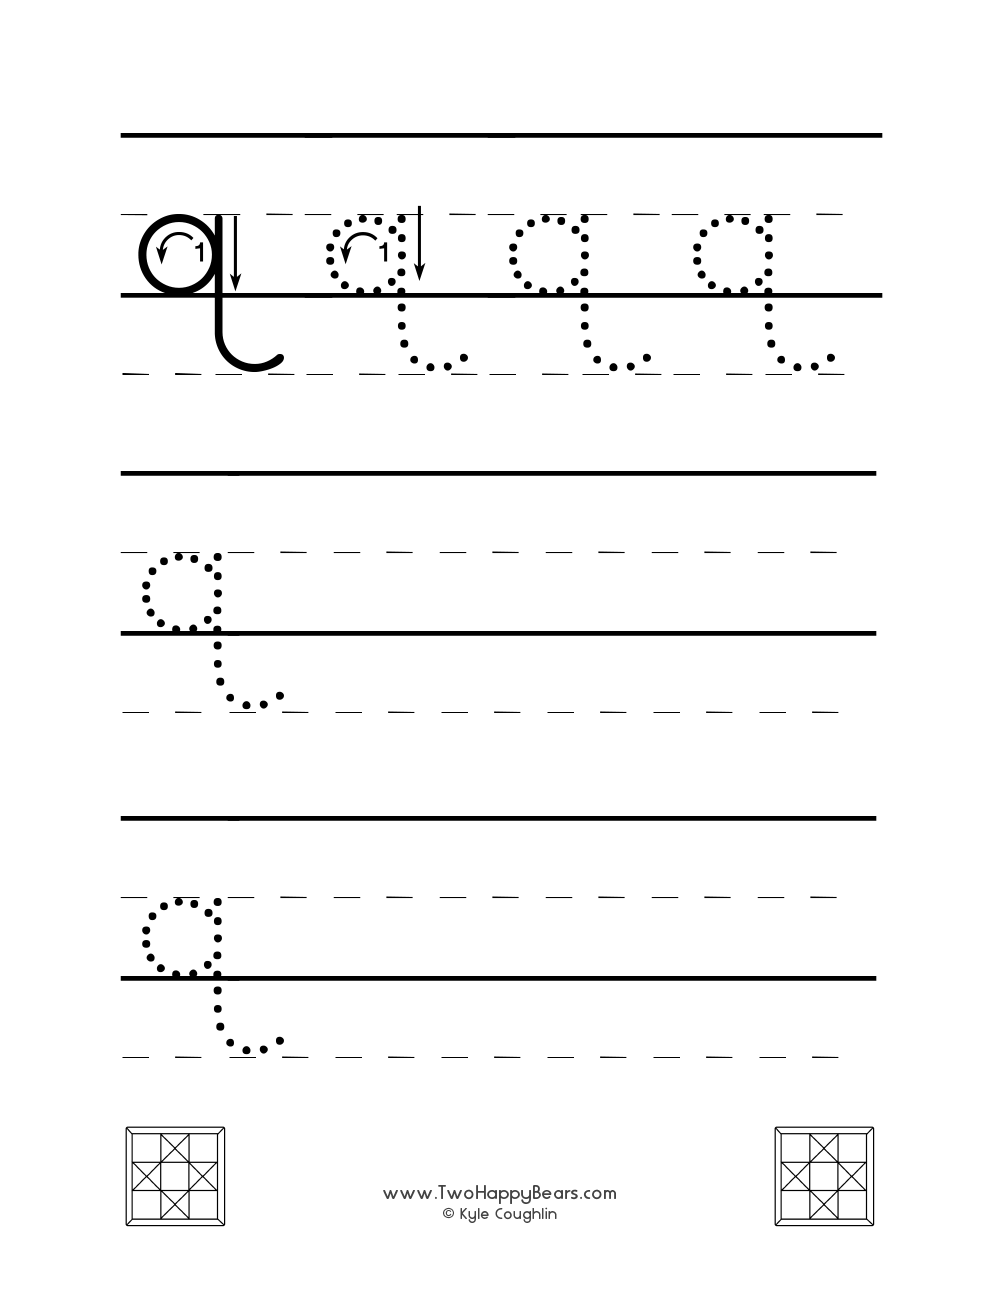 Worksheet for tracing and writing the lowercase letter Q, in free printable PDF format.